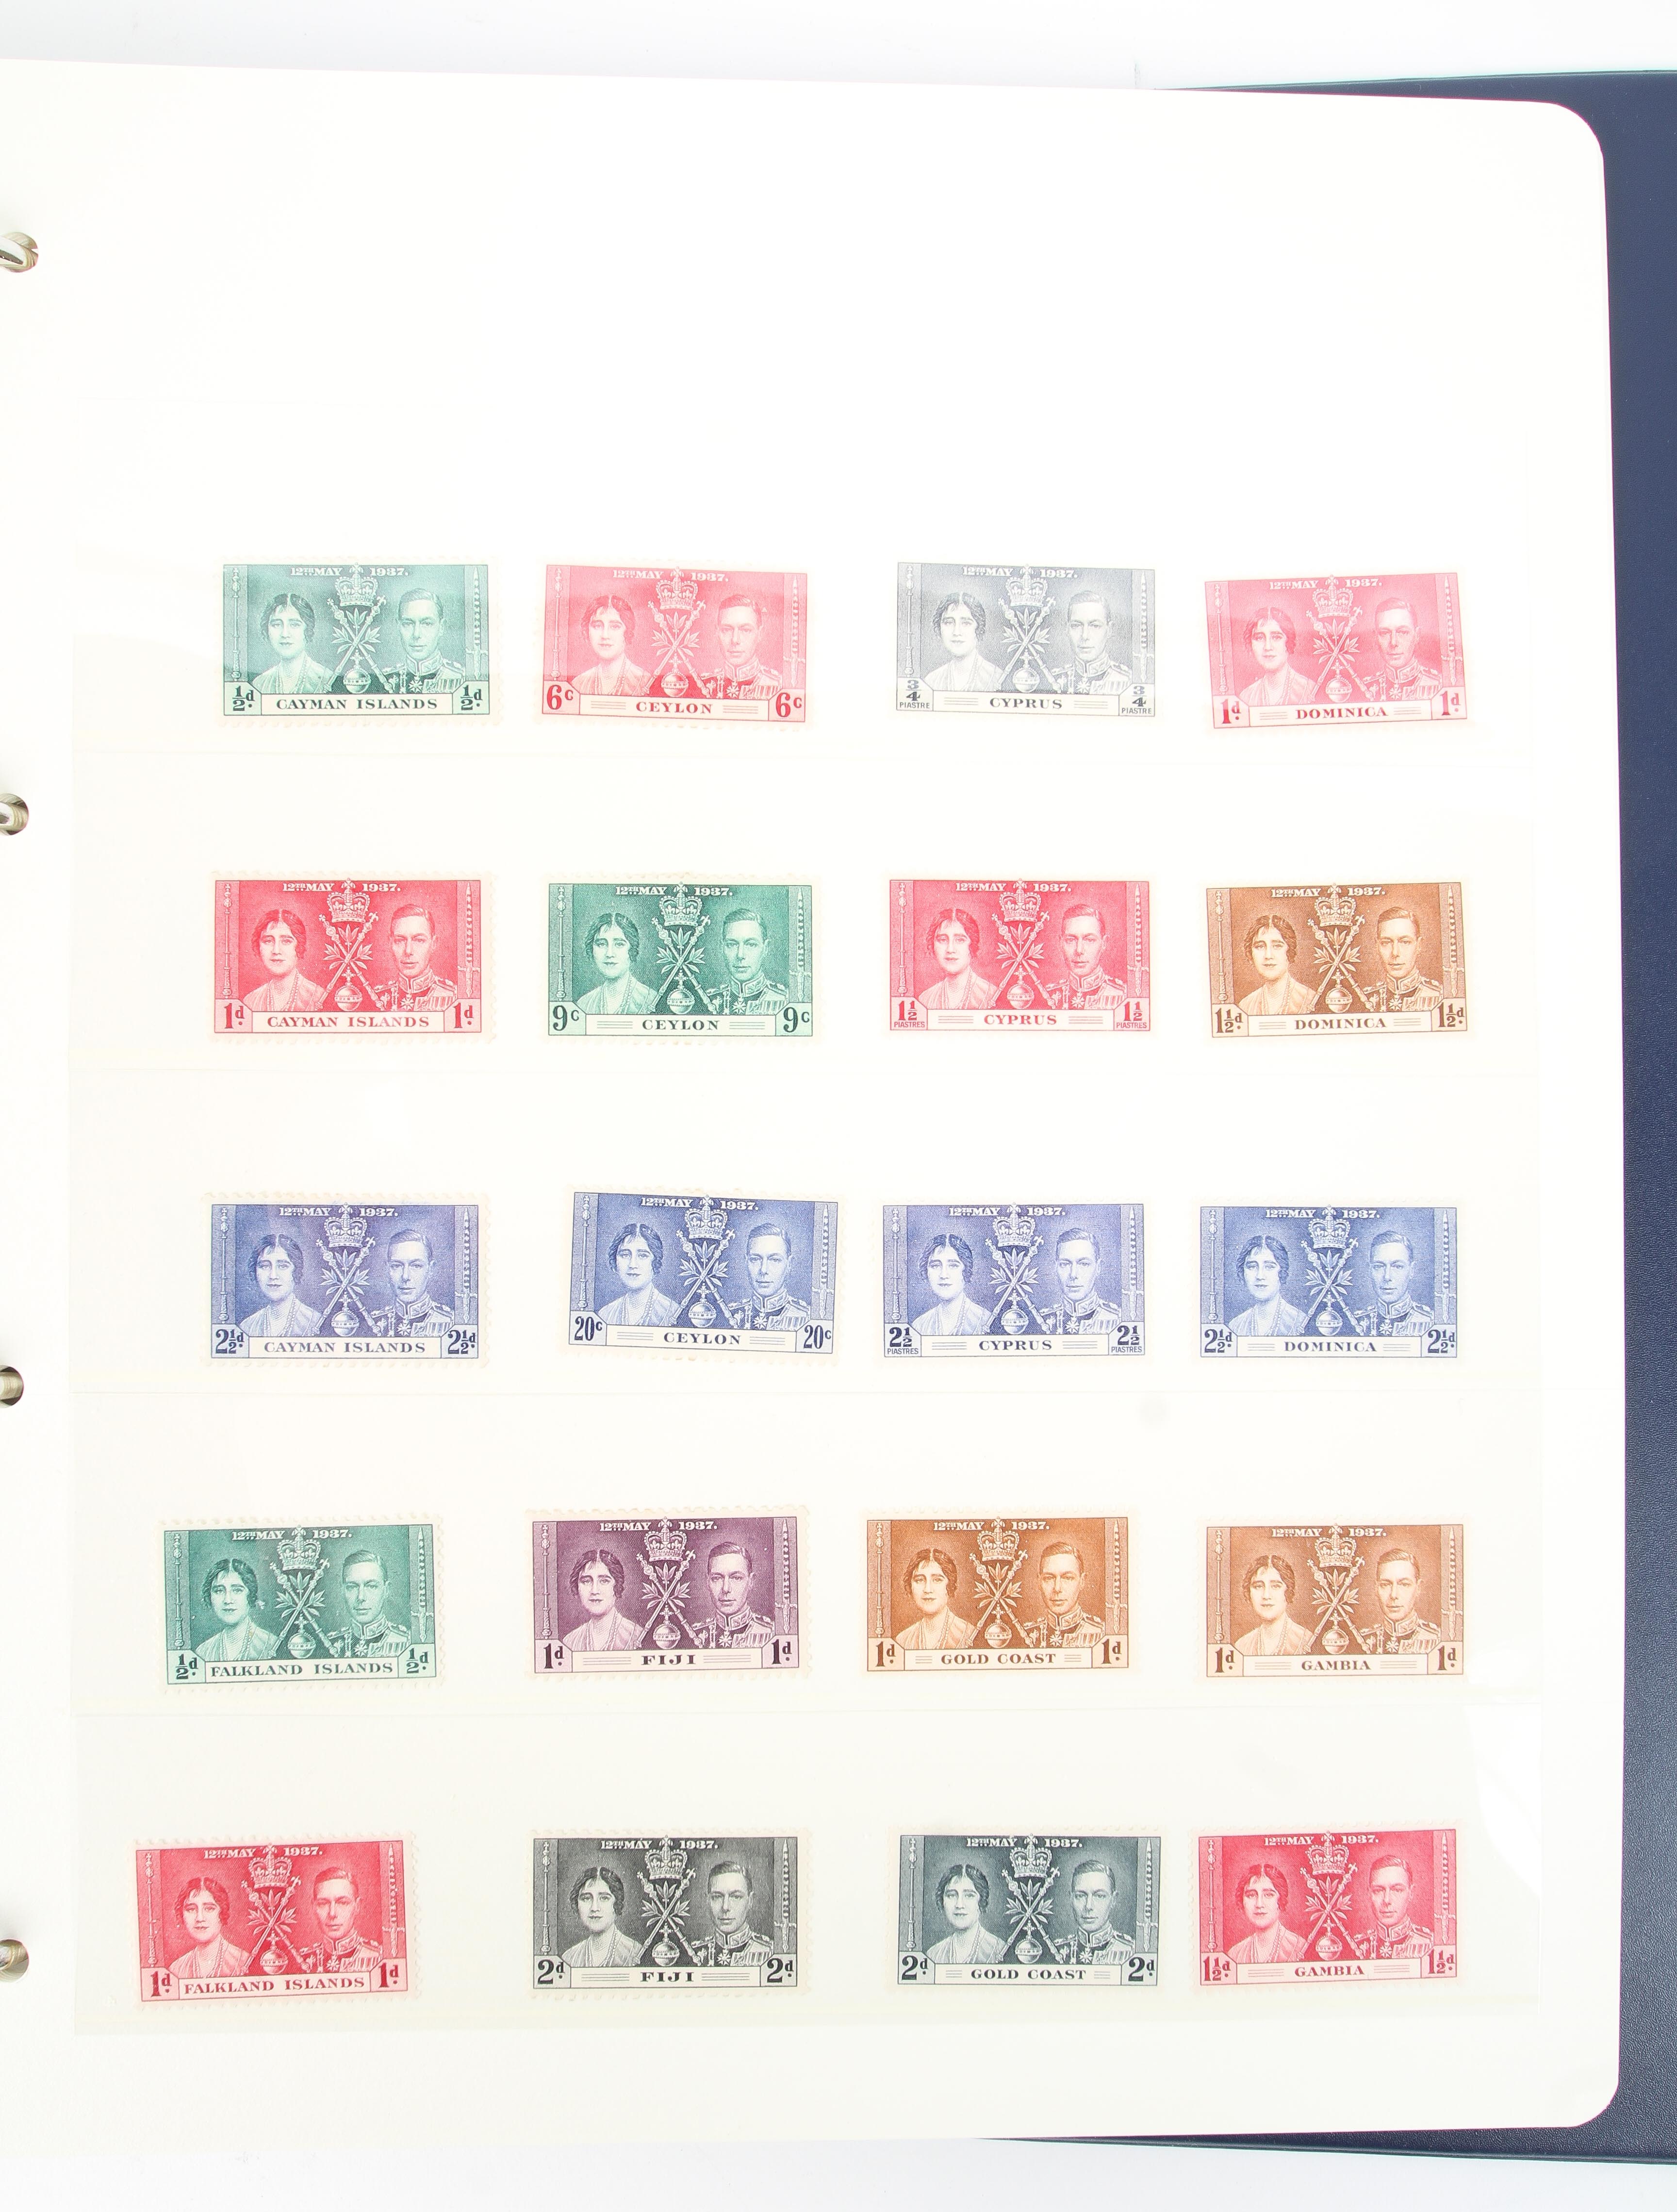 A folder containing The King George VI 1937 Coronation Omnibus Stamp Collection - Image 4 of 4